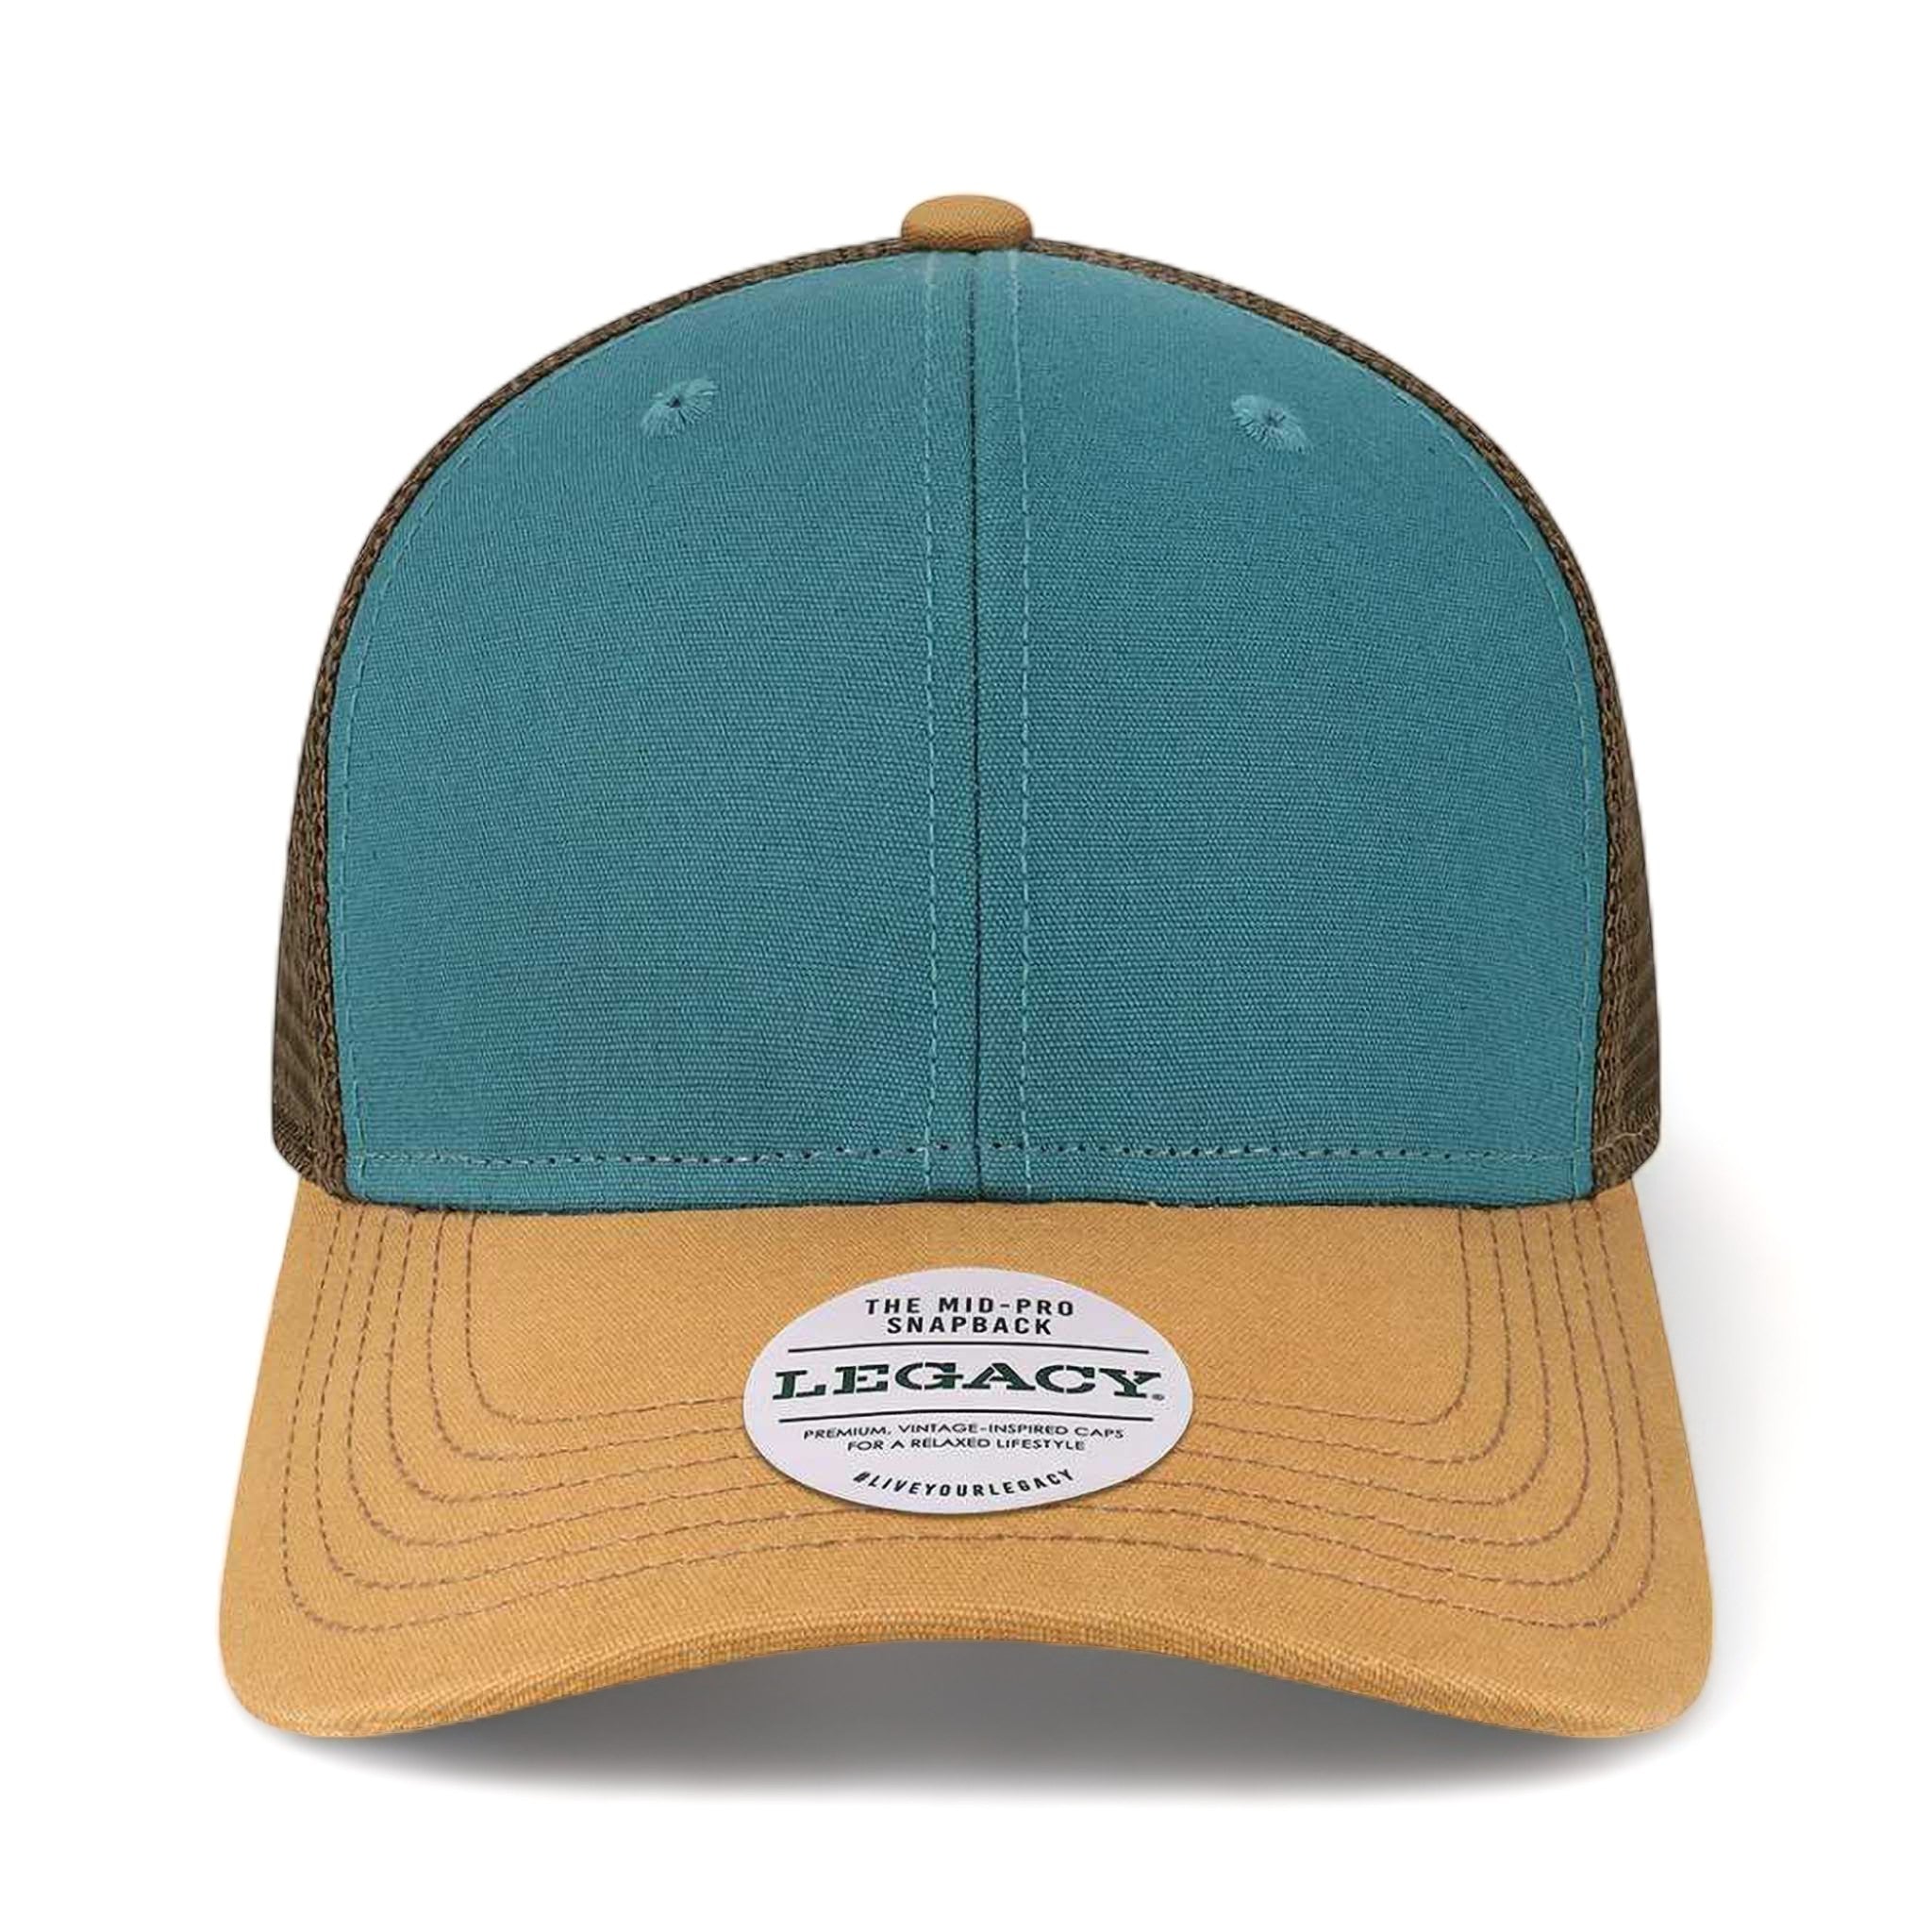 Front view of LEGACY MPS custom hat in marine, camel and brown